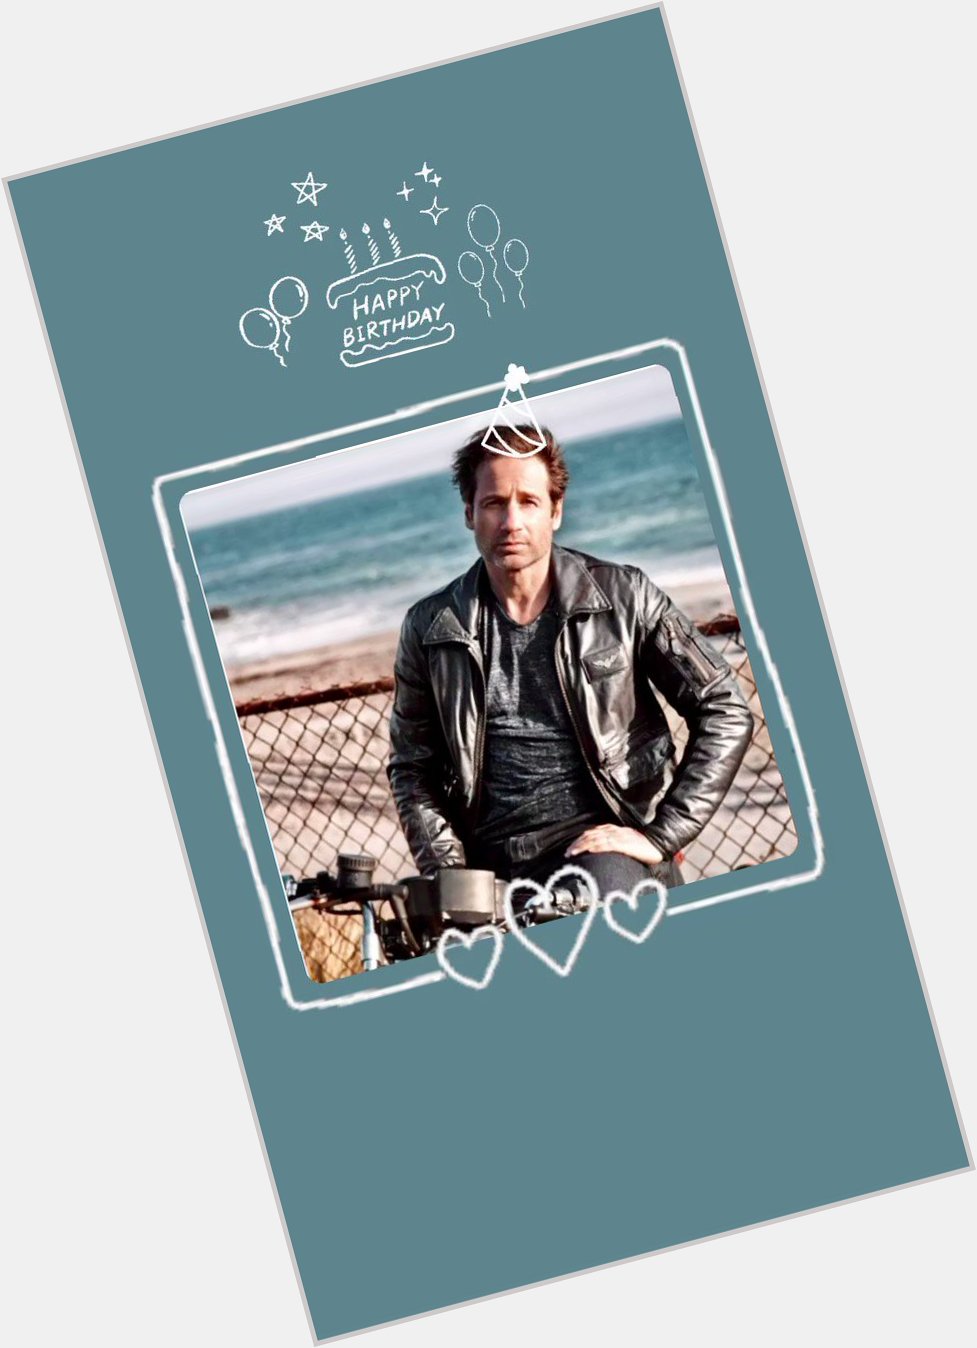 Happy Birthday David Duchovny!  You were the first man I ever had a crush on I was 6 